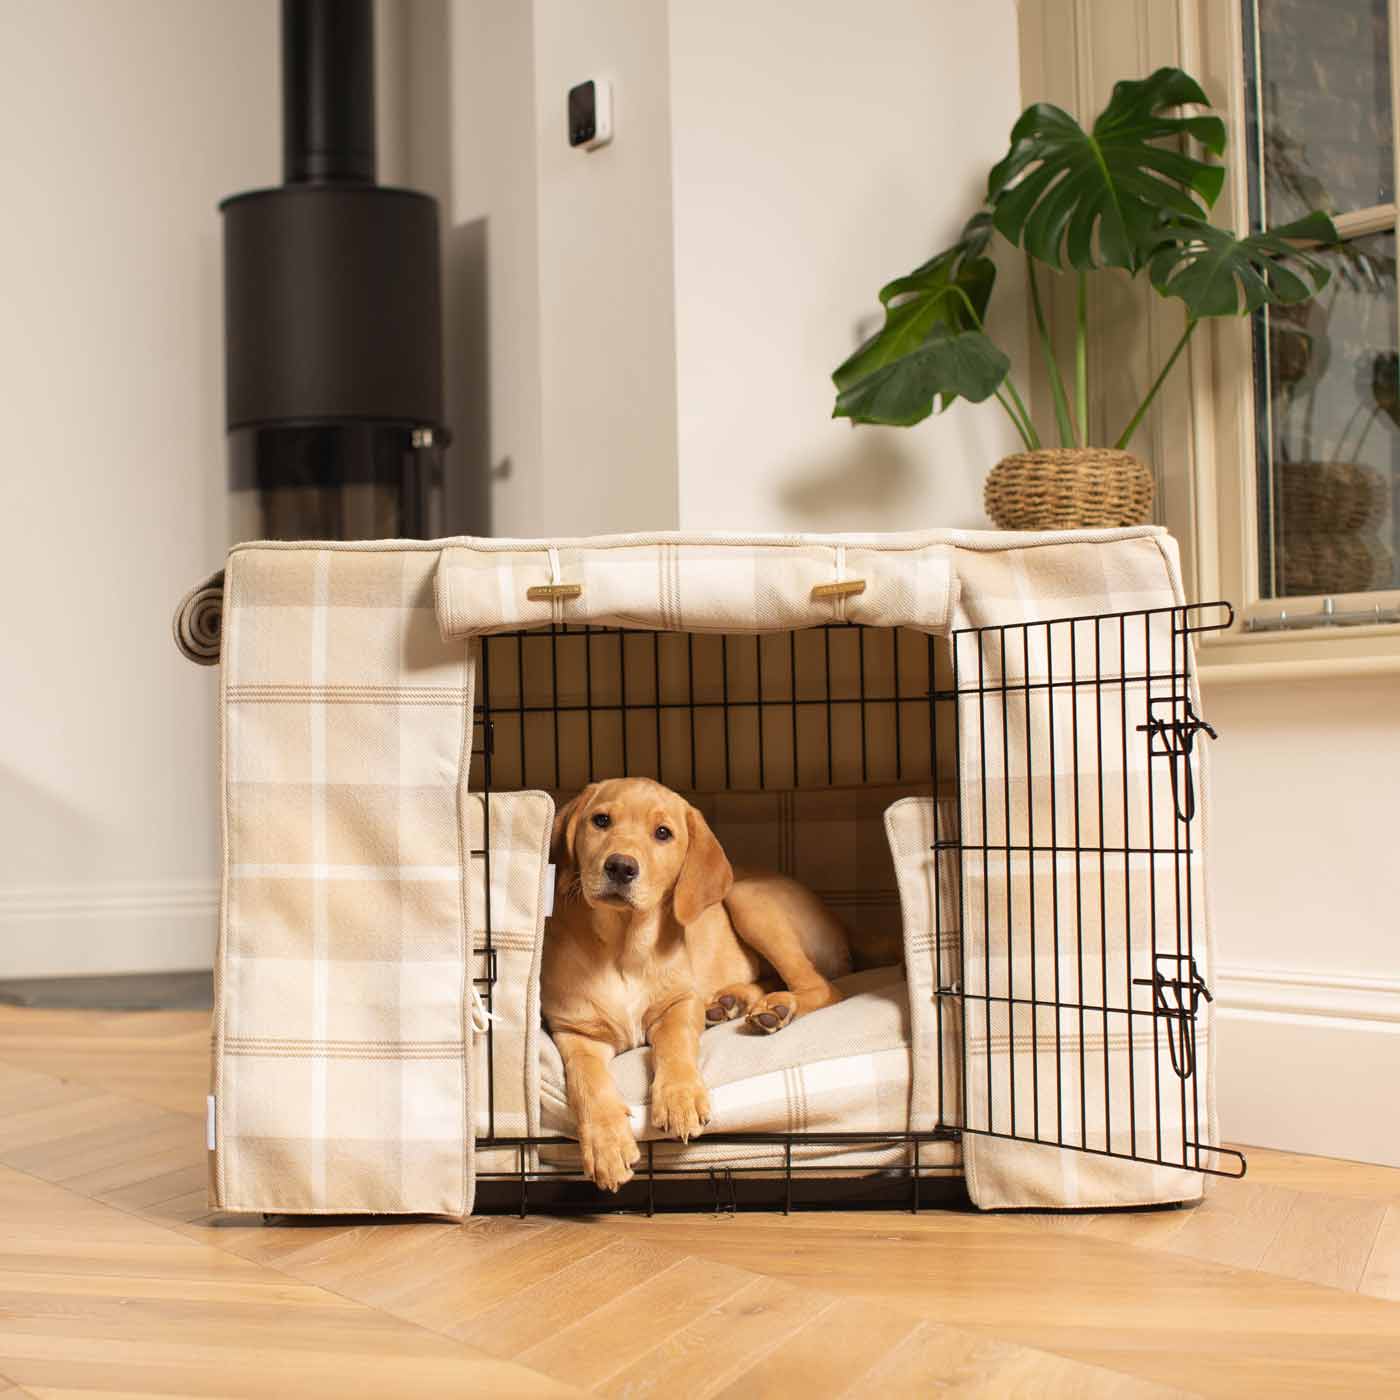 Luxury Black Dog Cage Set With Cushion, Bumper and Cage Cover. The Perfect Dog Cage For The Ultimate Naptime, Available Now at Lords & Labradors US